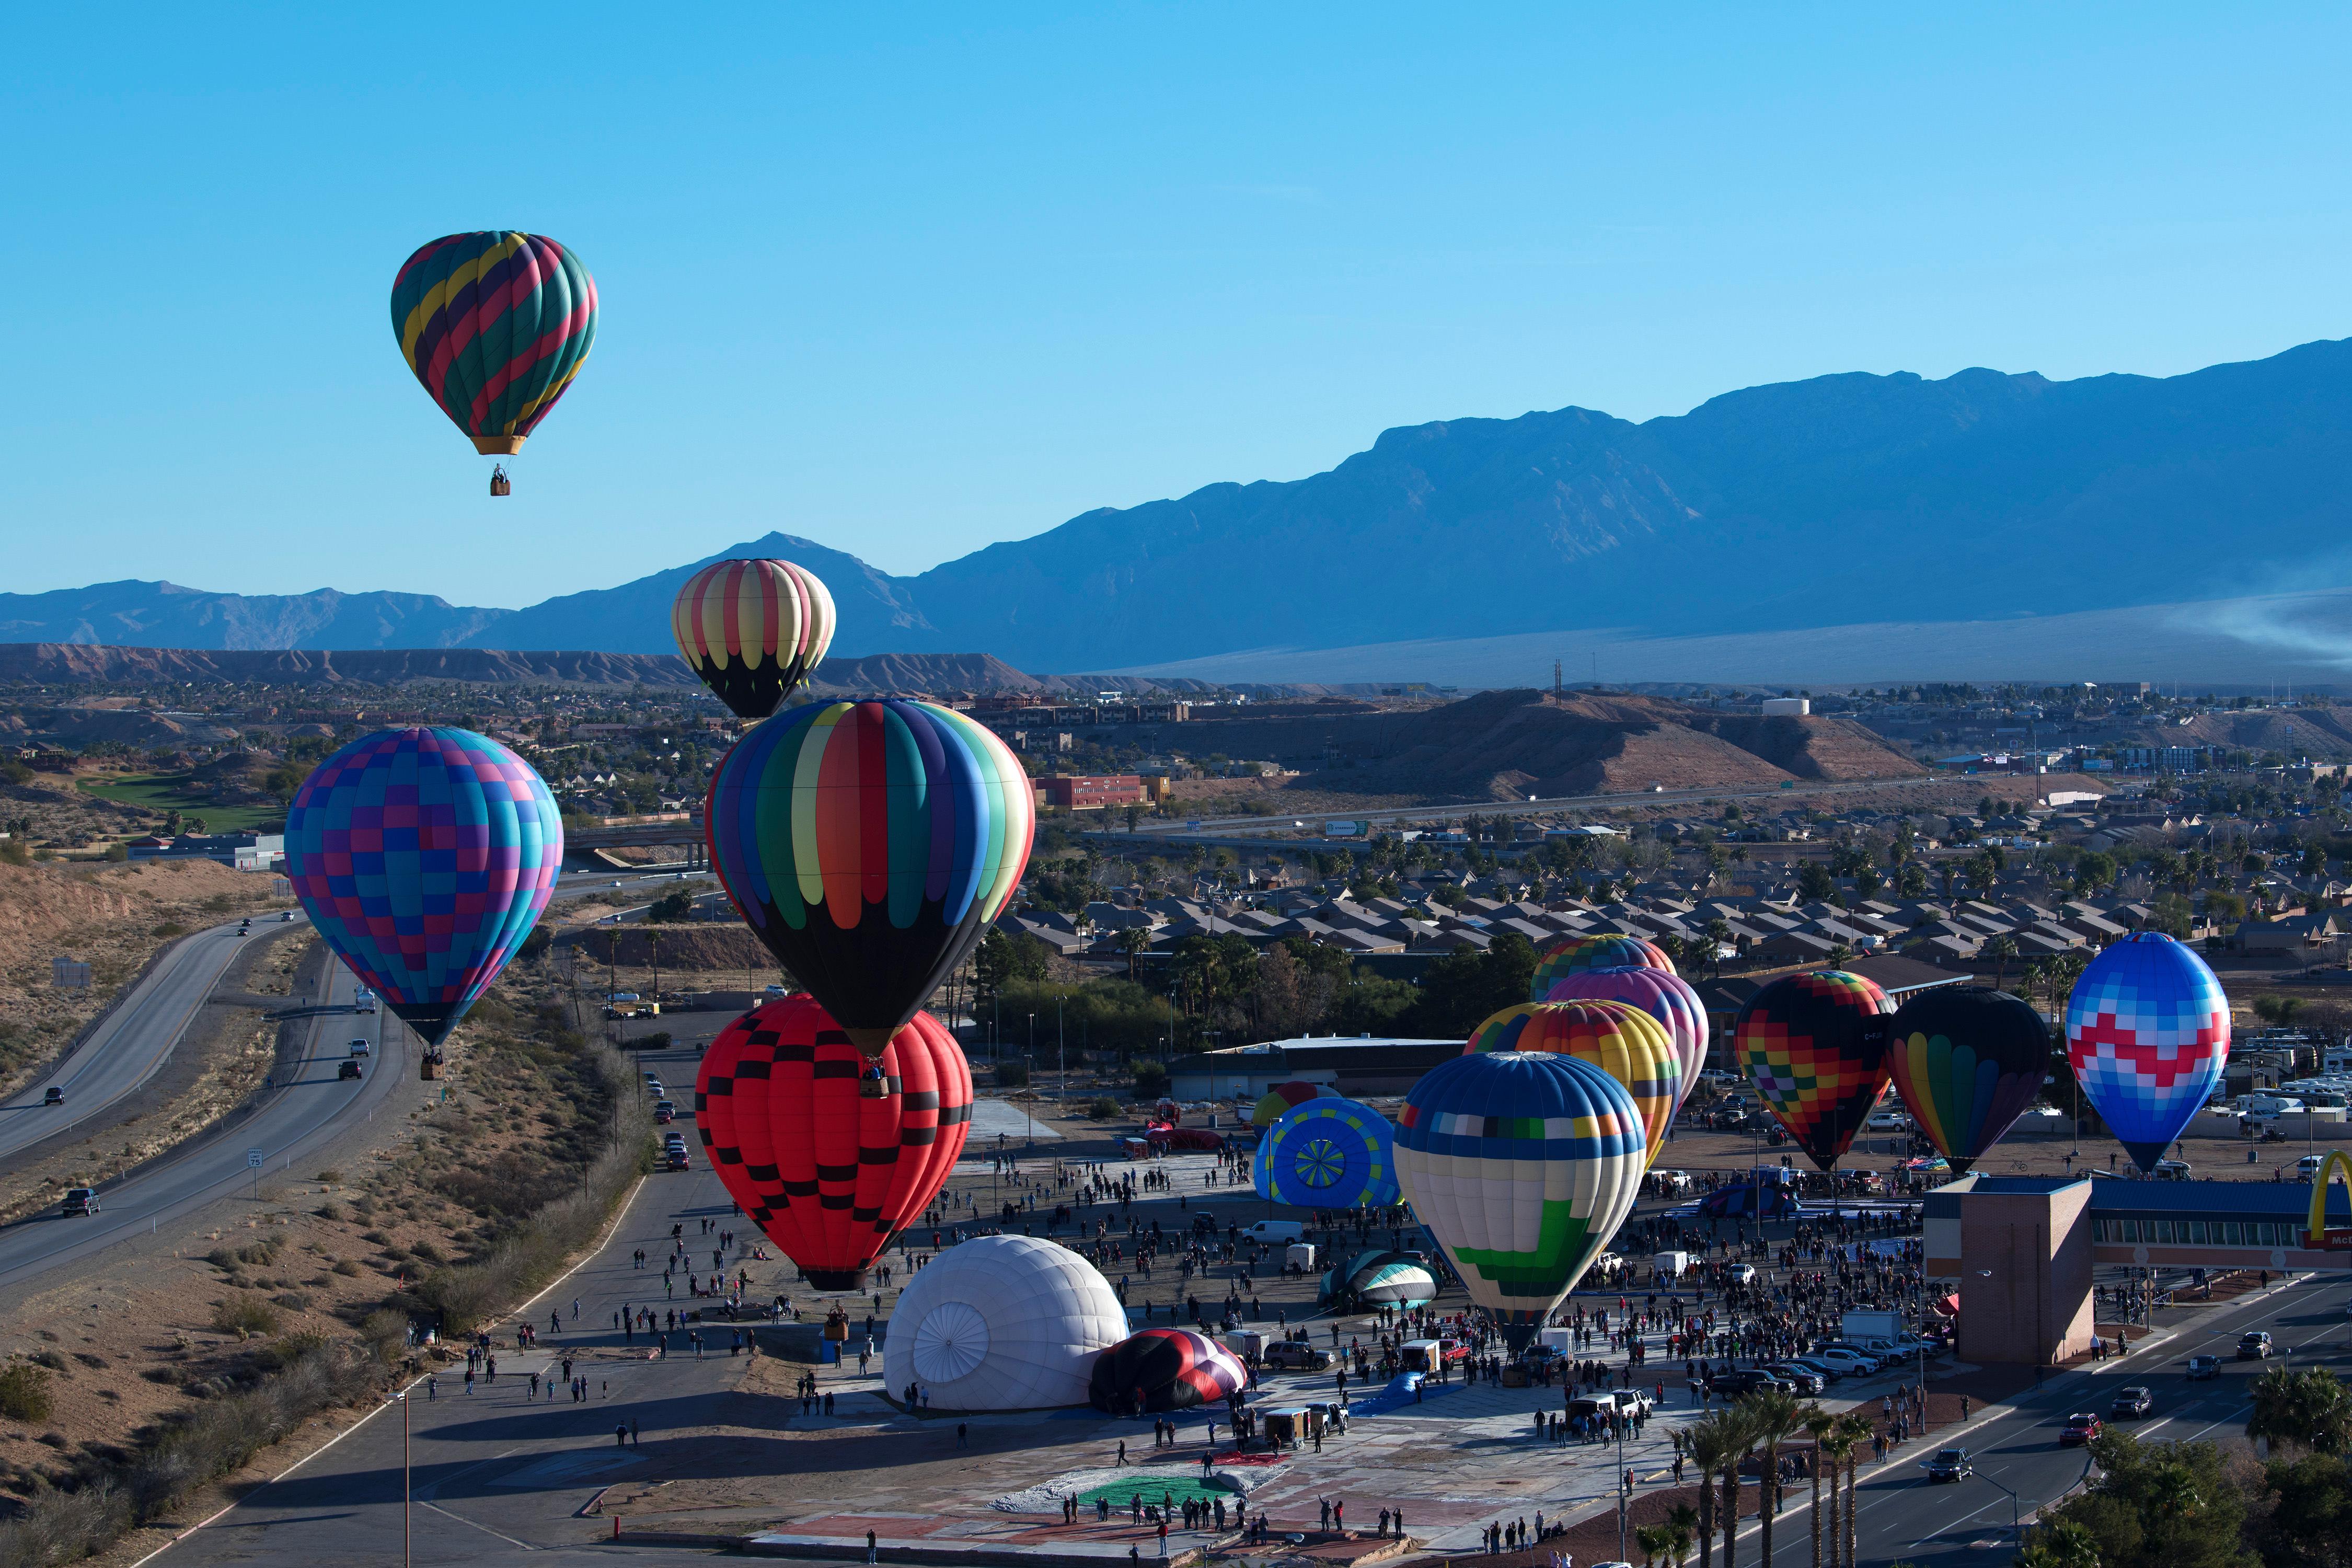 GALLERY Balloons take to the sky during Mesquite Hot Air Balloon